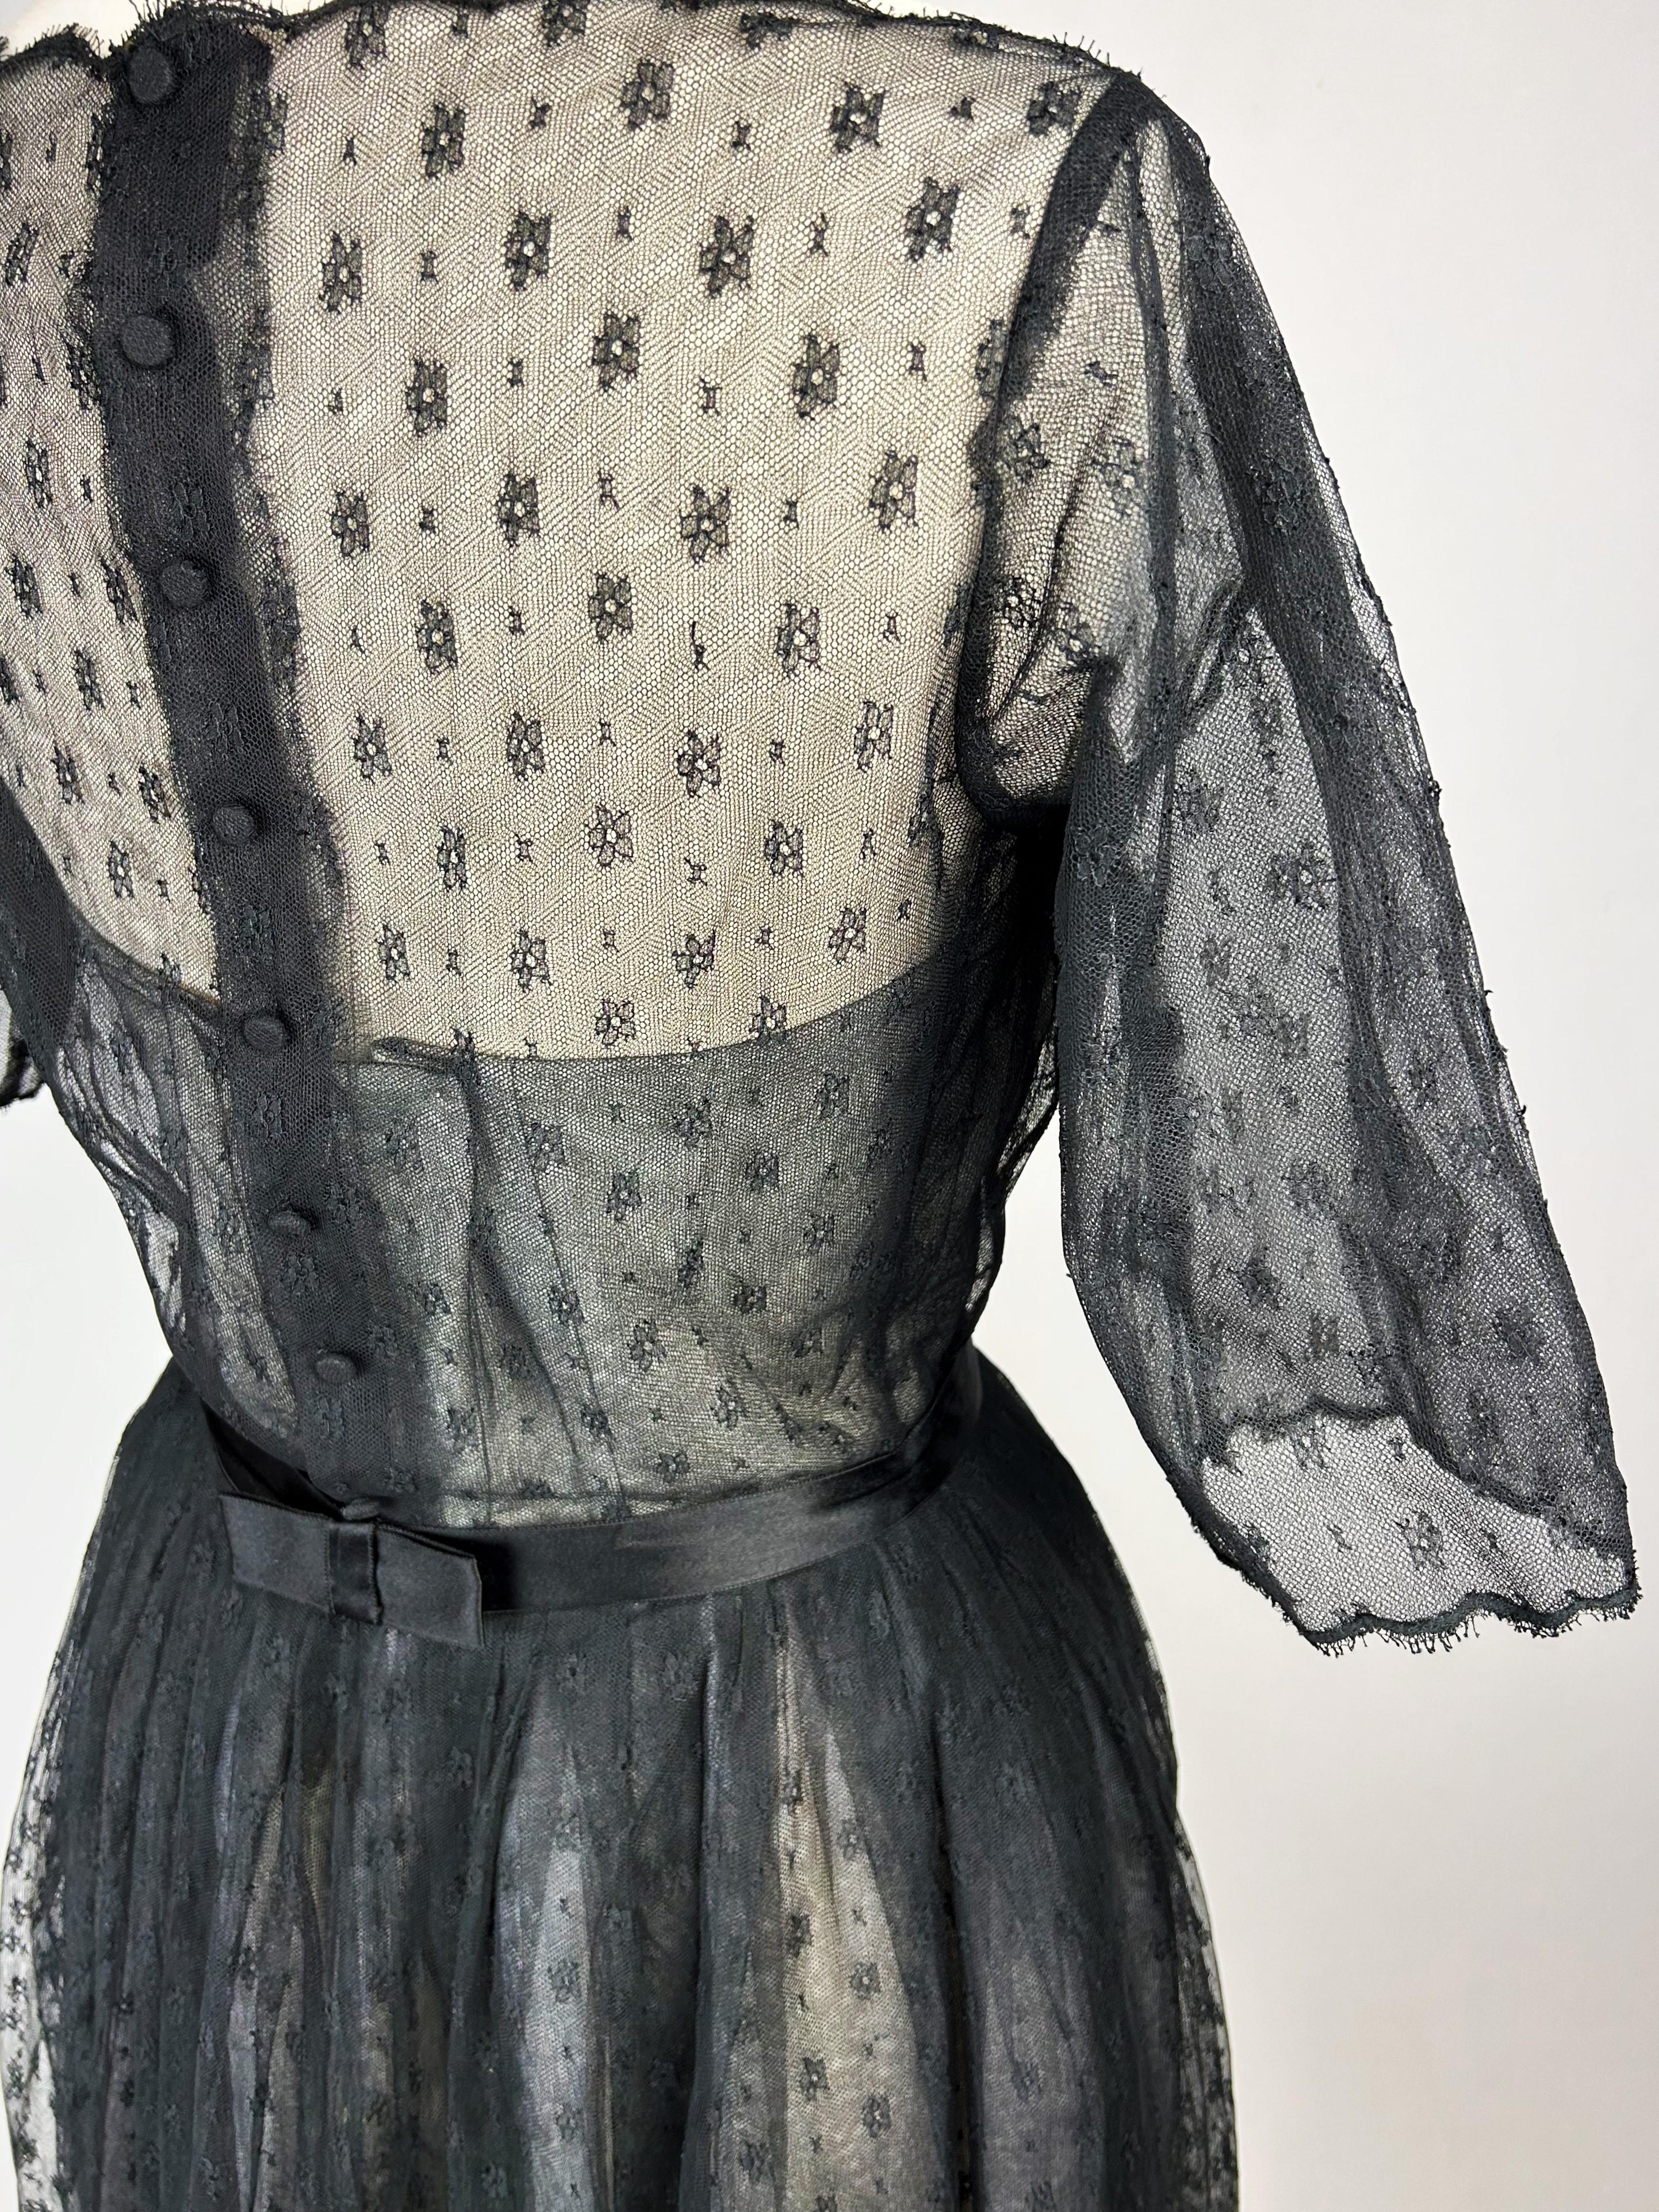 Christian Dior/Saint Laurent Couture Lace Dress (attributed to) Almaviva C.1960 9